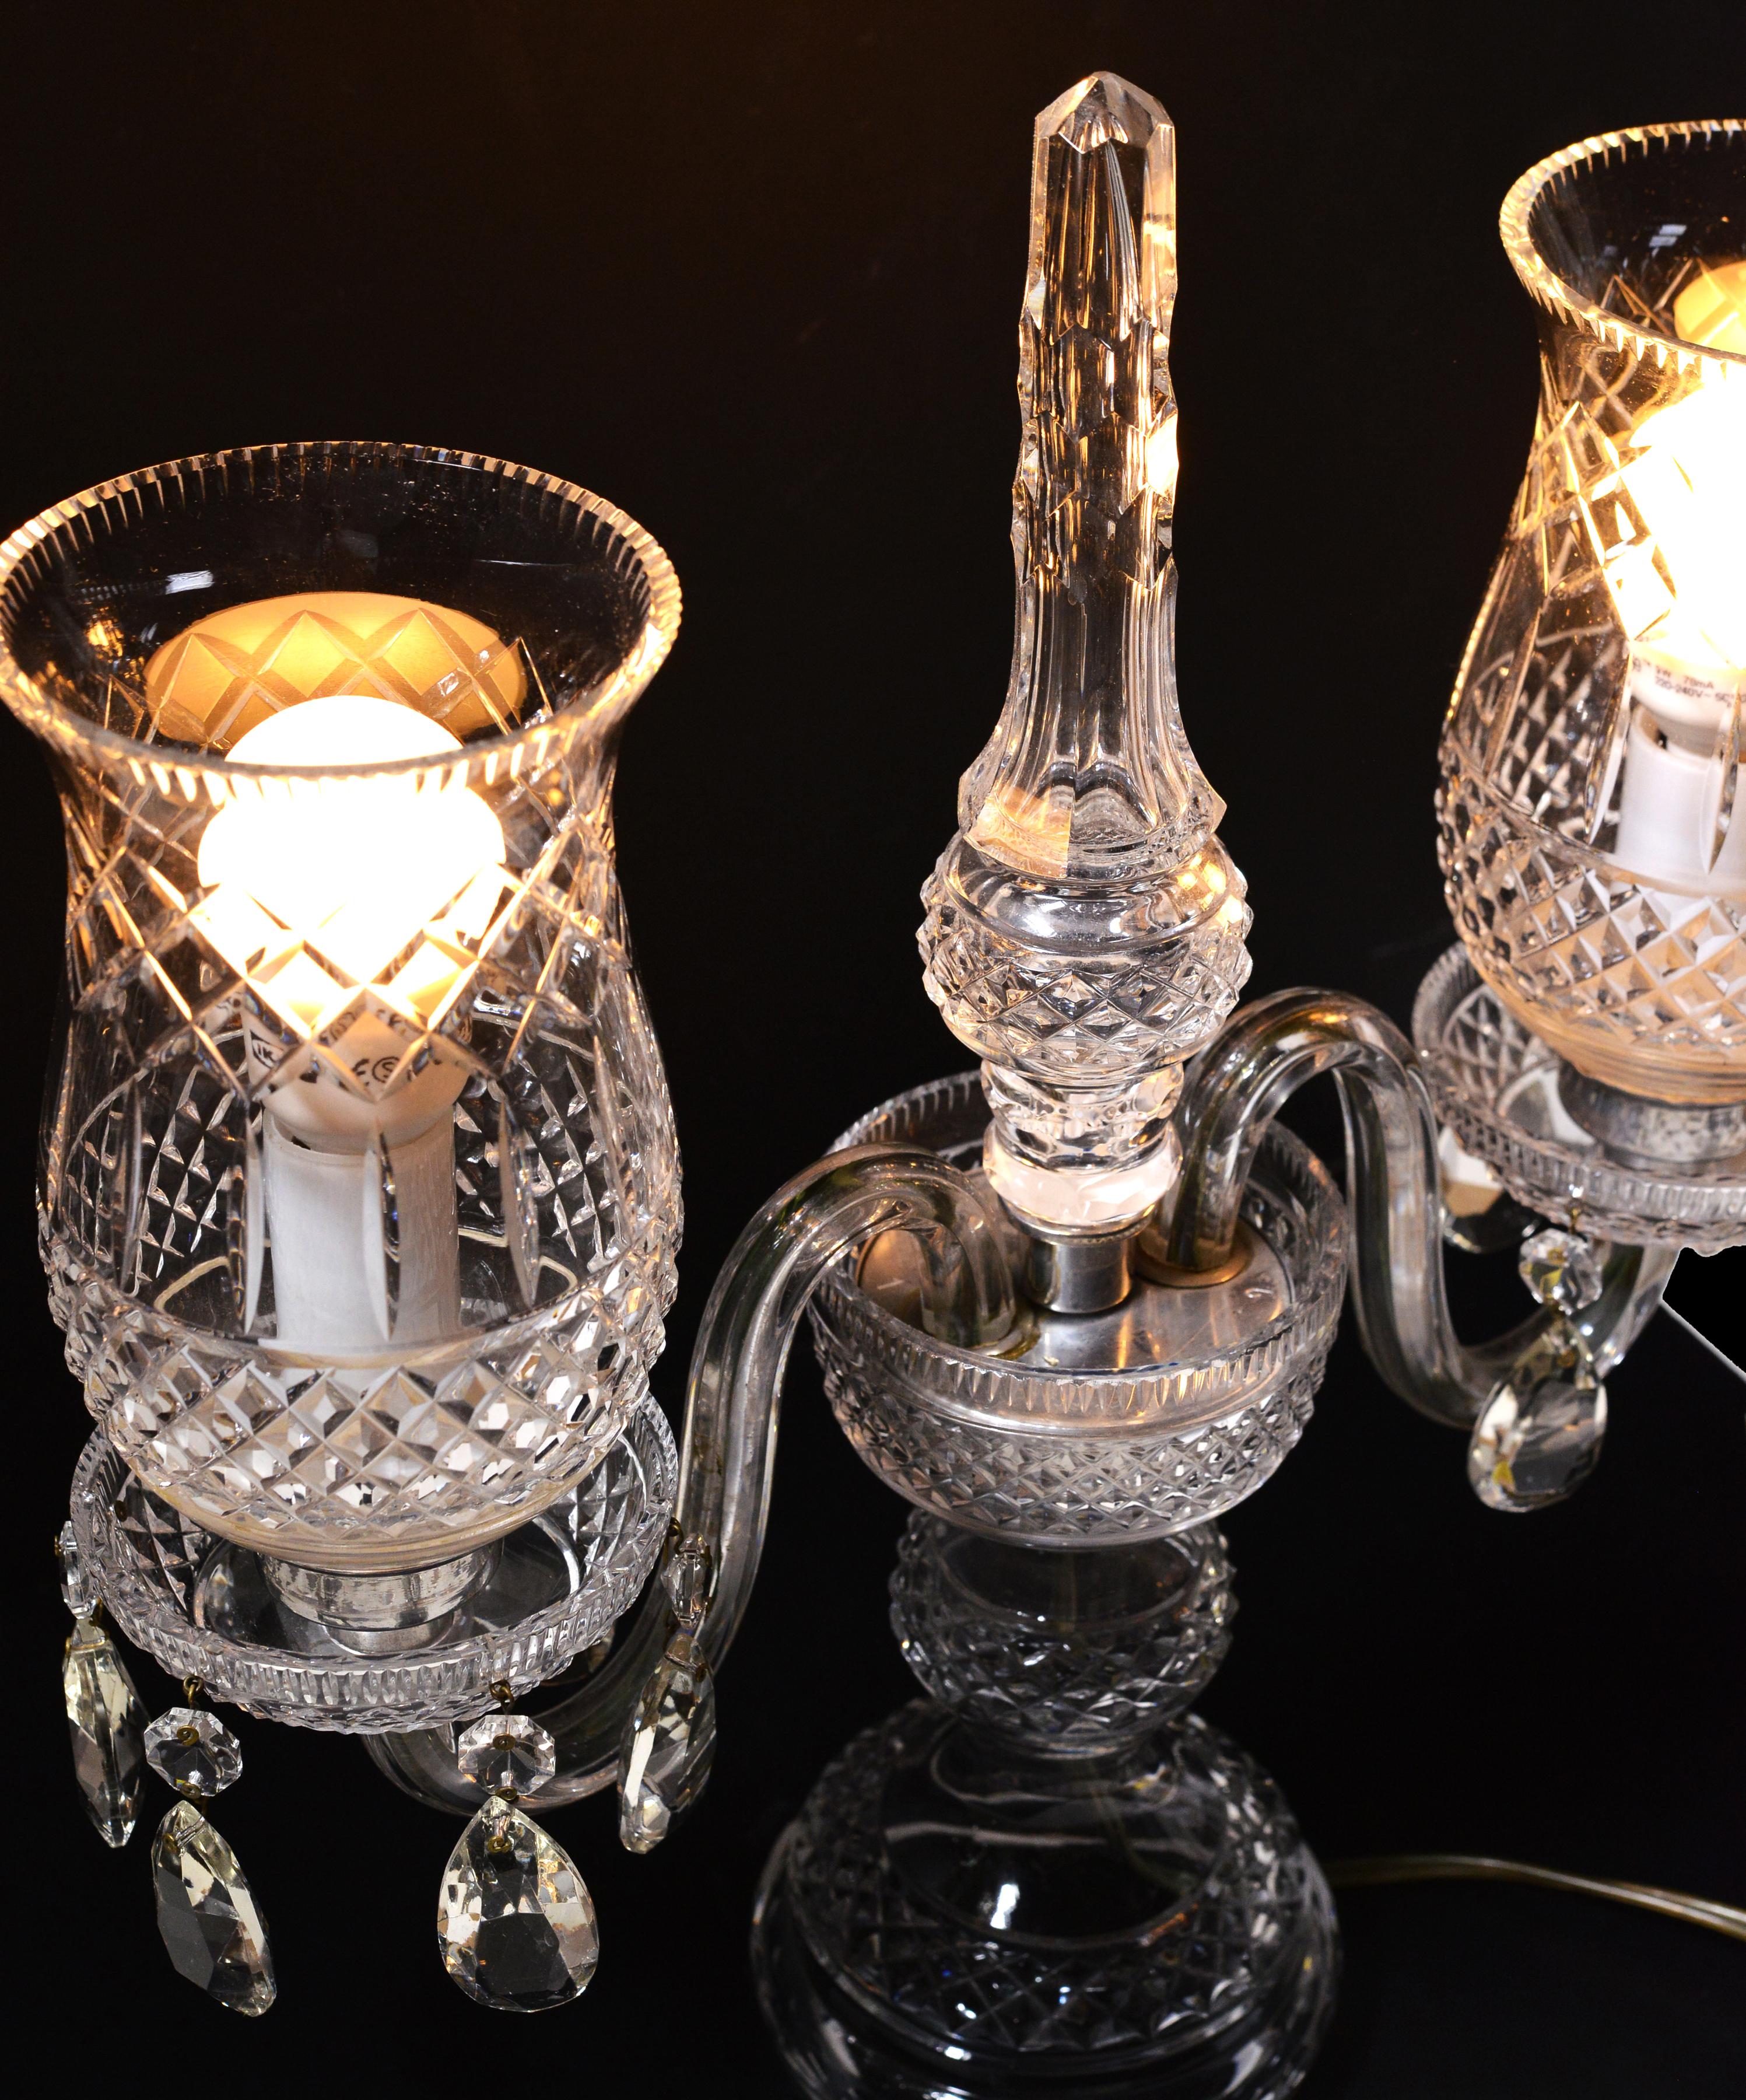 Vintage Crystal Candelabra Double Hurricane Lamp Baccarat style 20th century For Sale 2